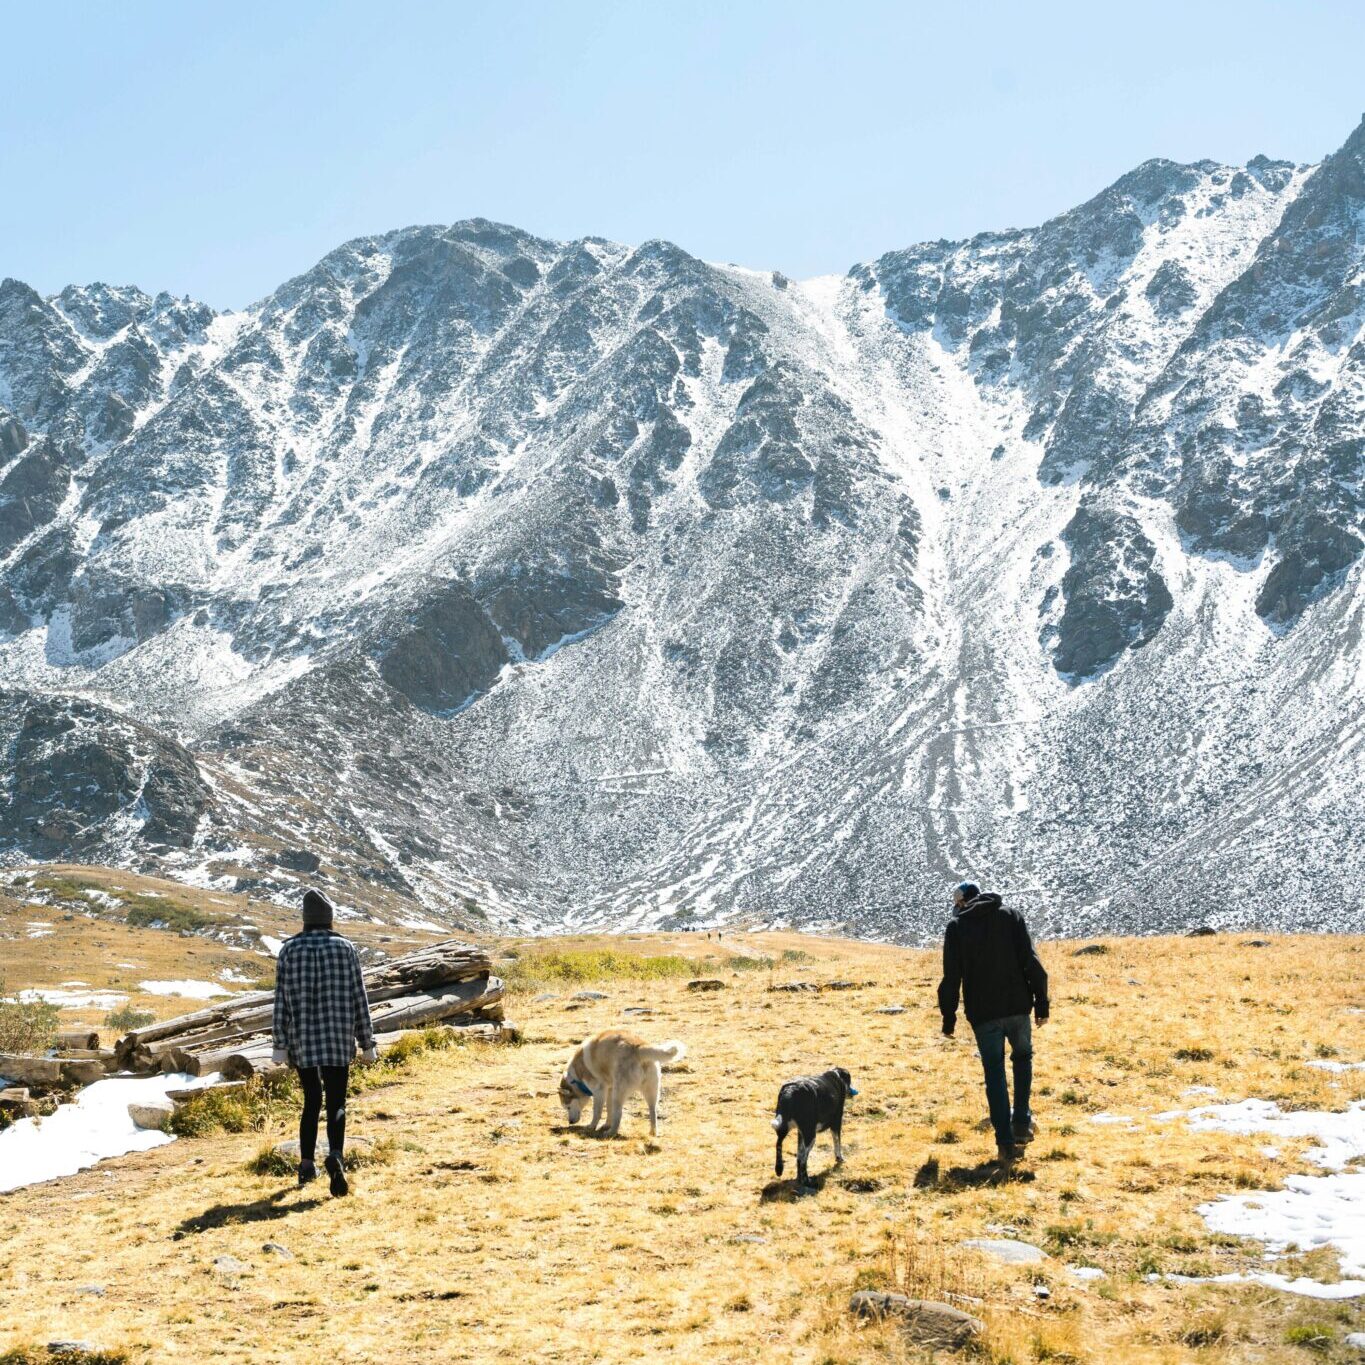 People mountain hiking with dogs